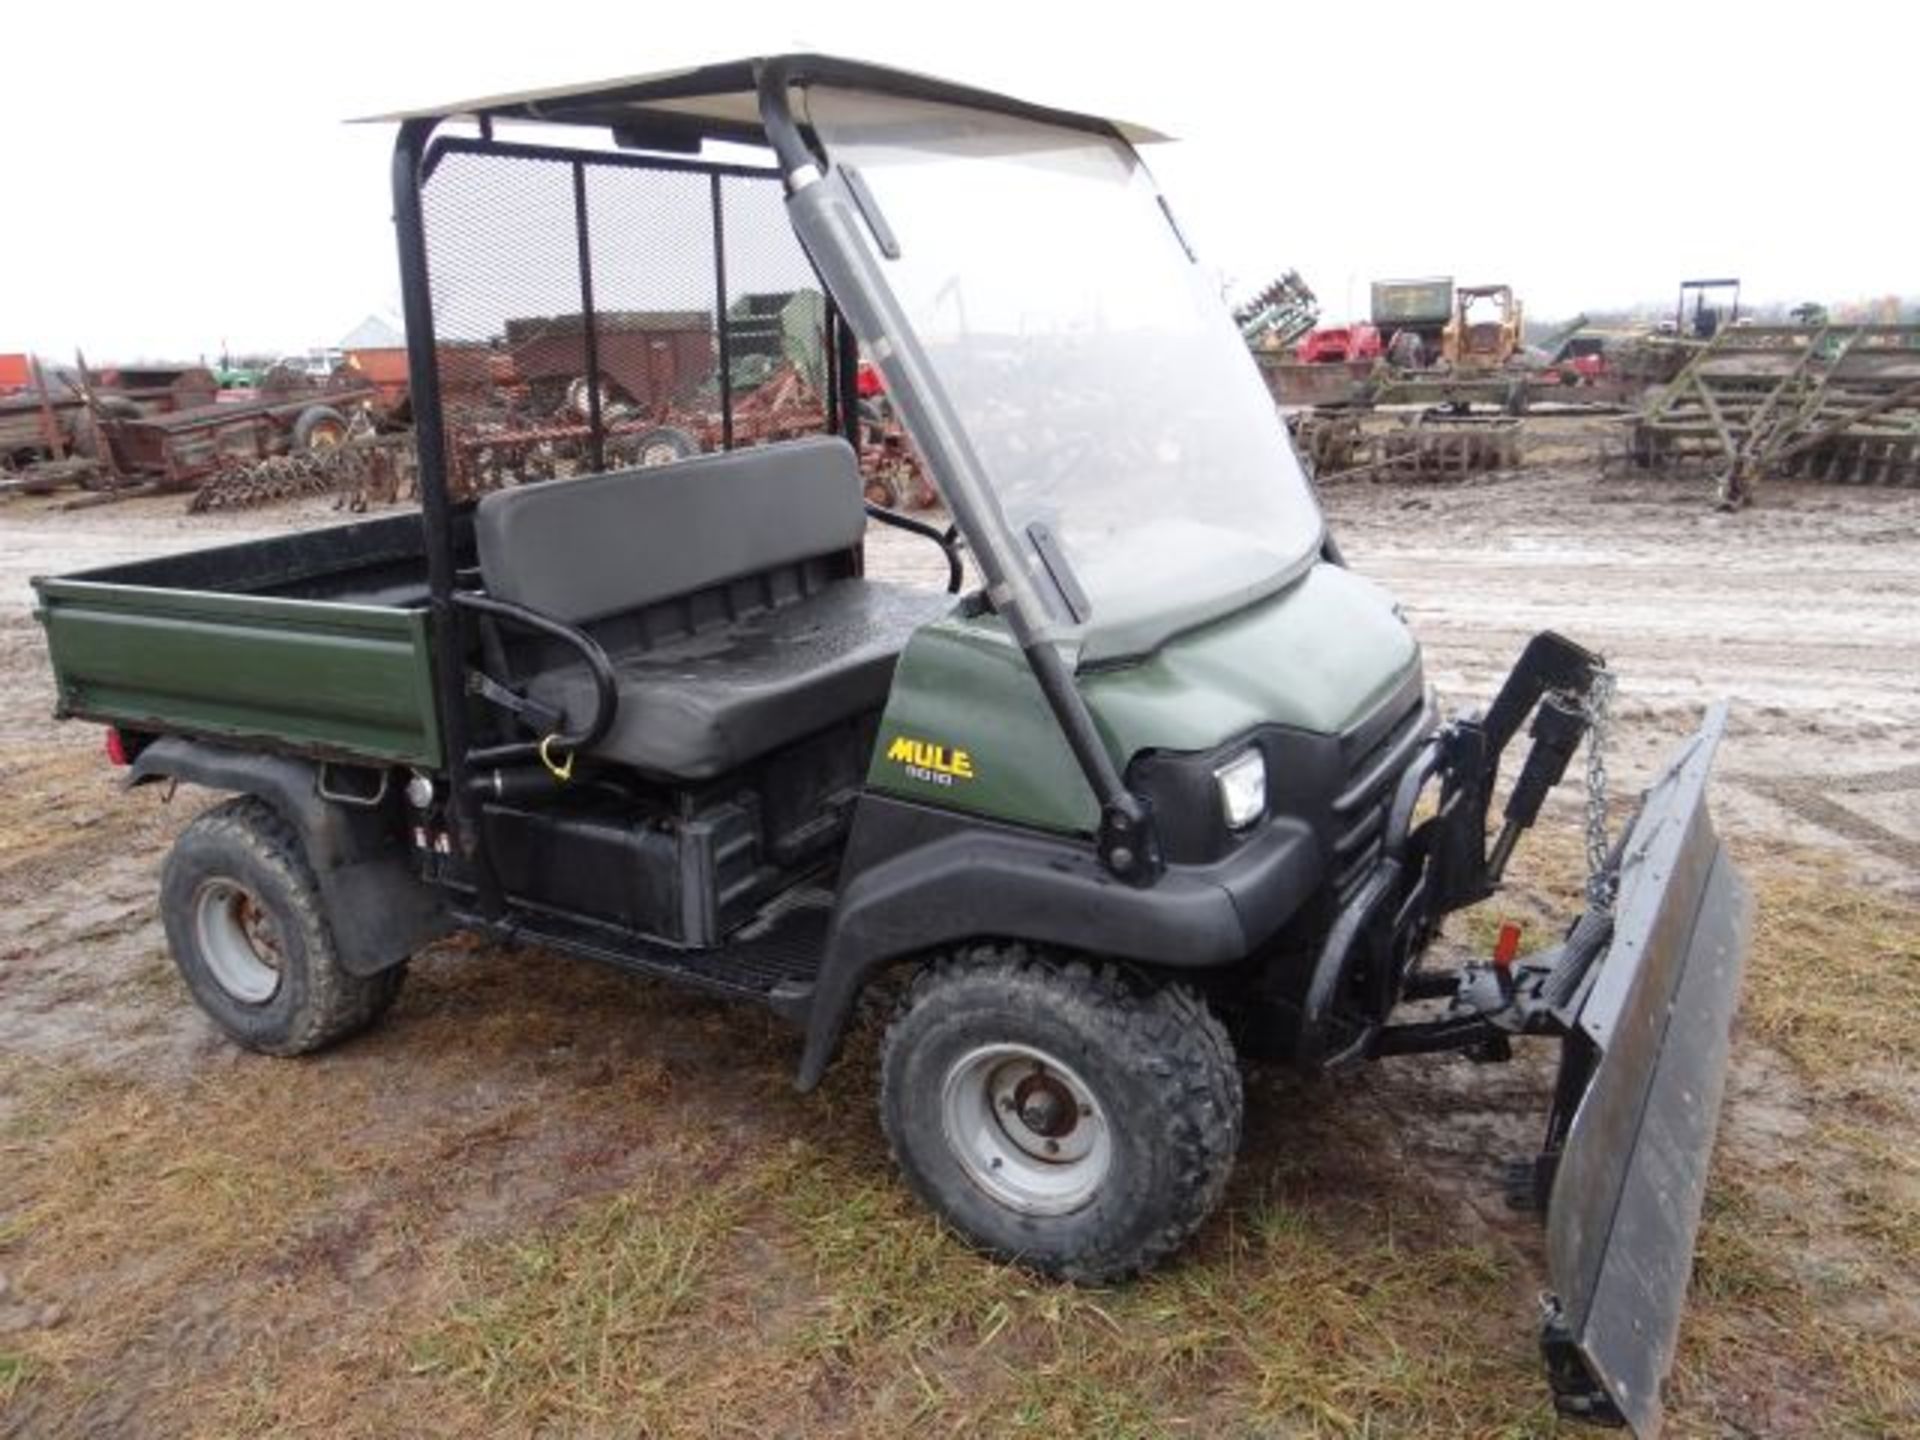 Kawasaki 3010 Mule, 2007 #112654, 960 hrs, Snow Blade, Power Lift, 4wd, Poly Windshield and Roof - Bild 2 aus 3